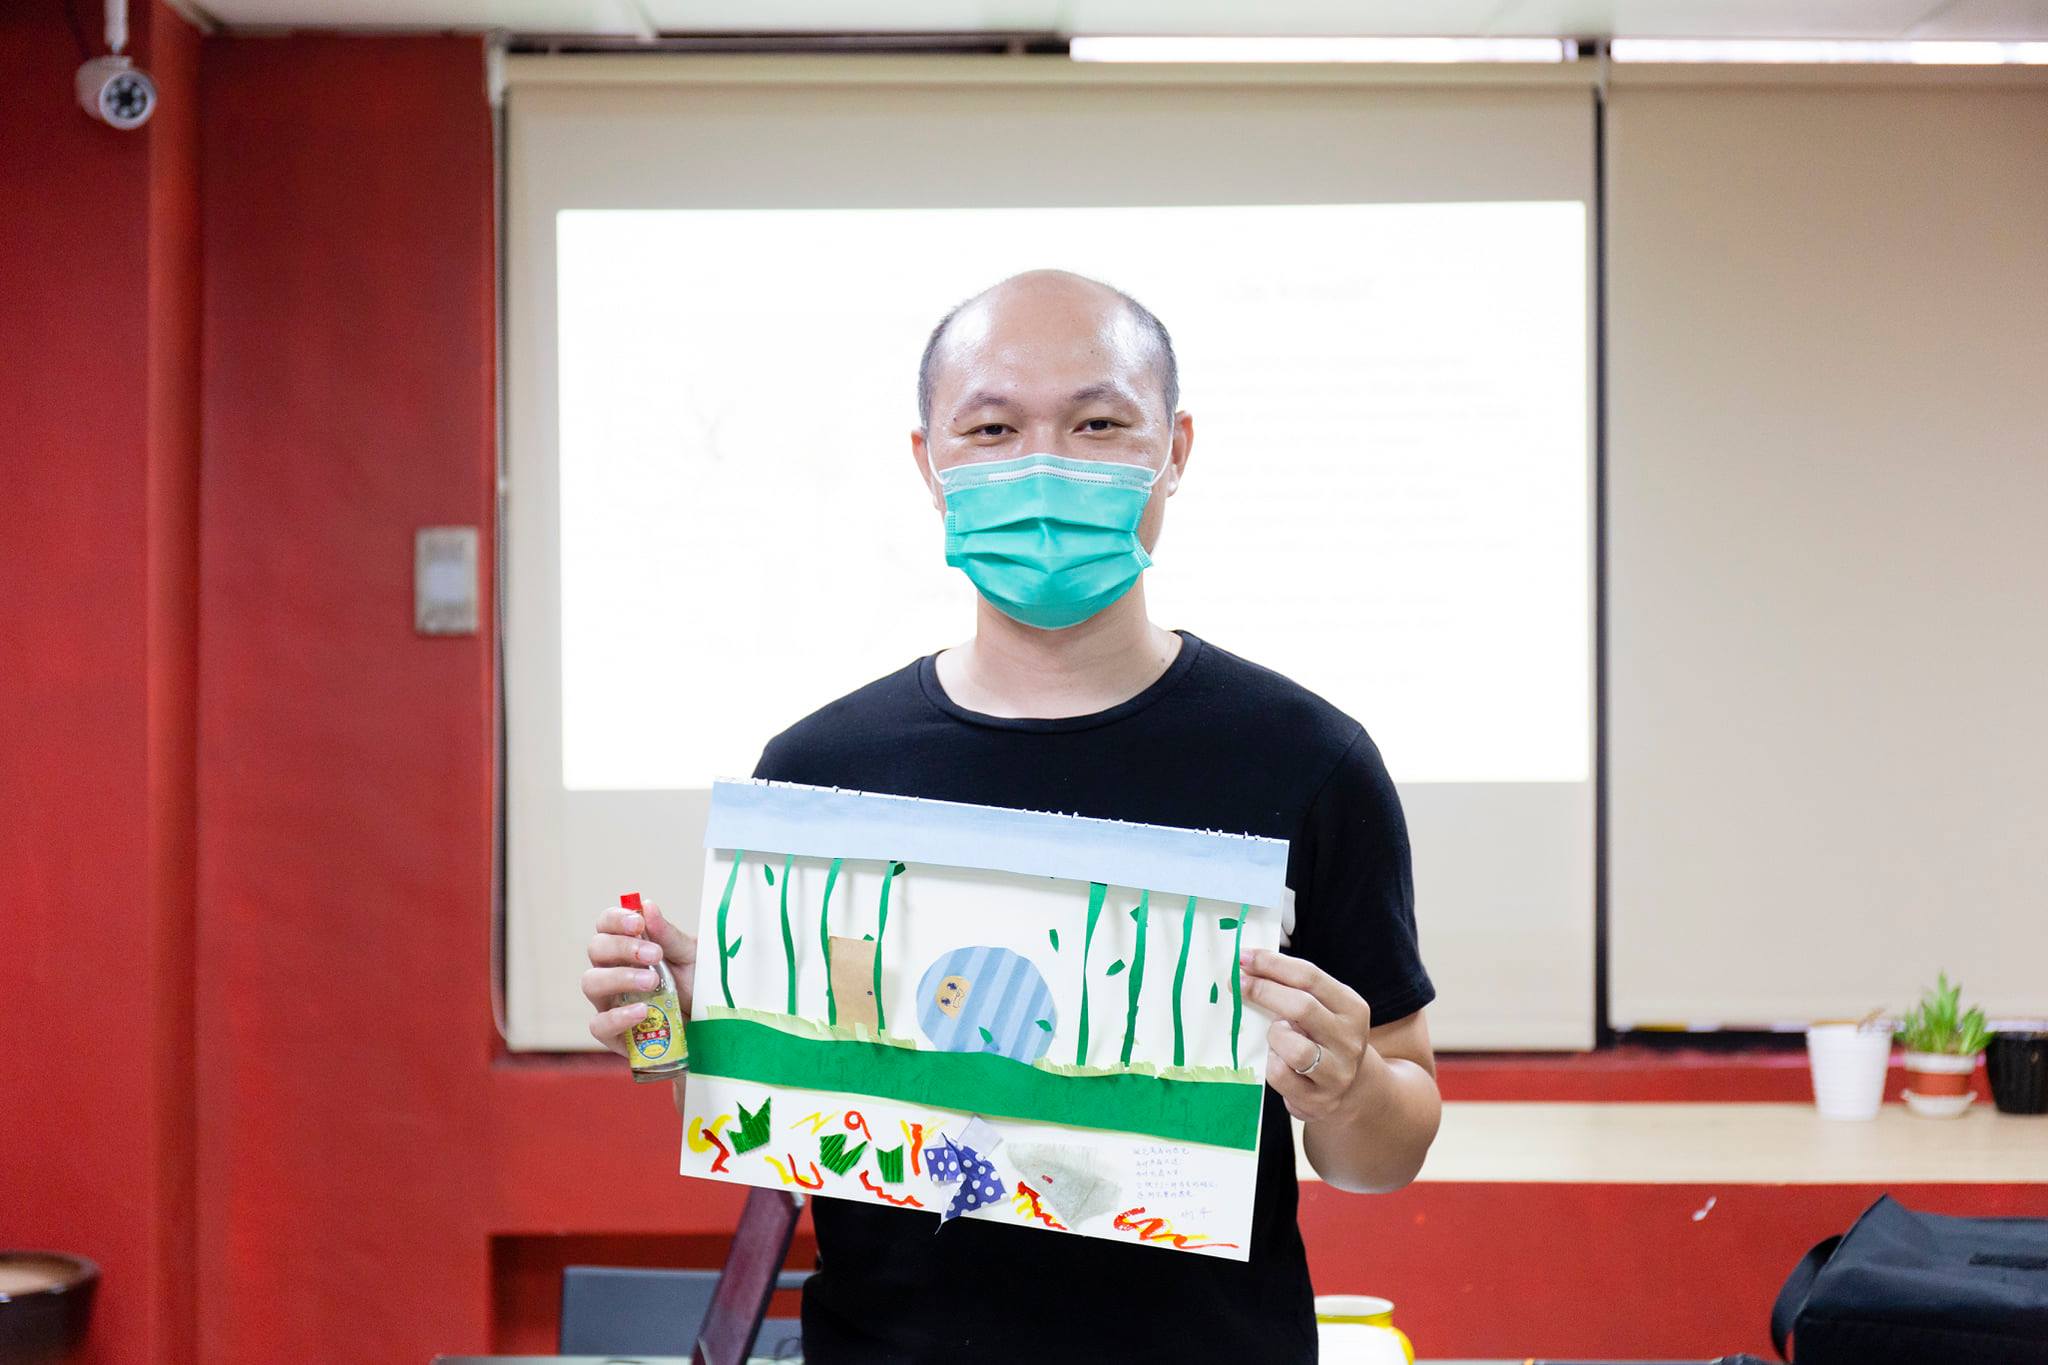 Lin participated in the creative workshop to show his attitude towards life. (Photo / Provided by Lin Wei Jie)